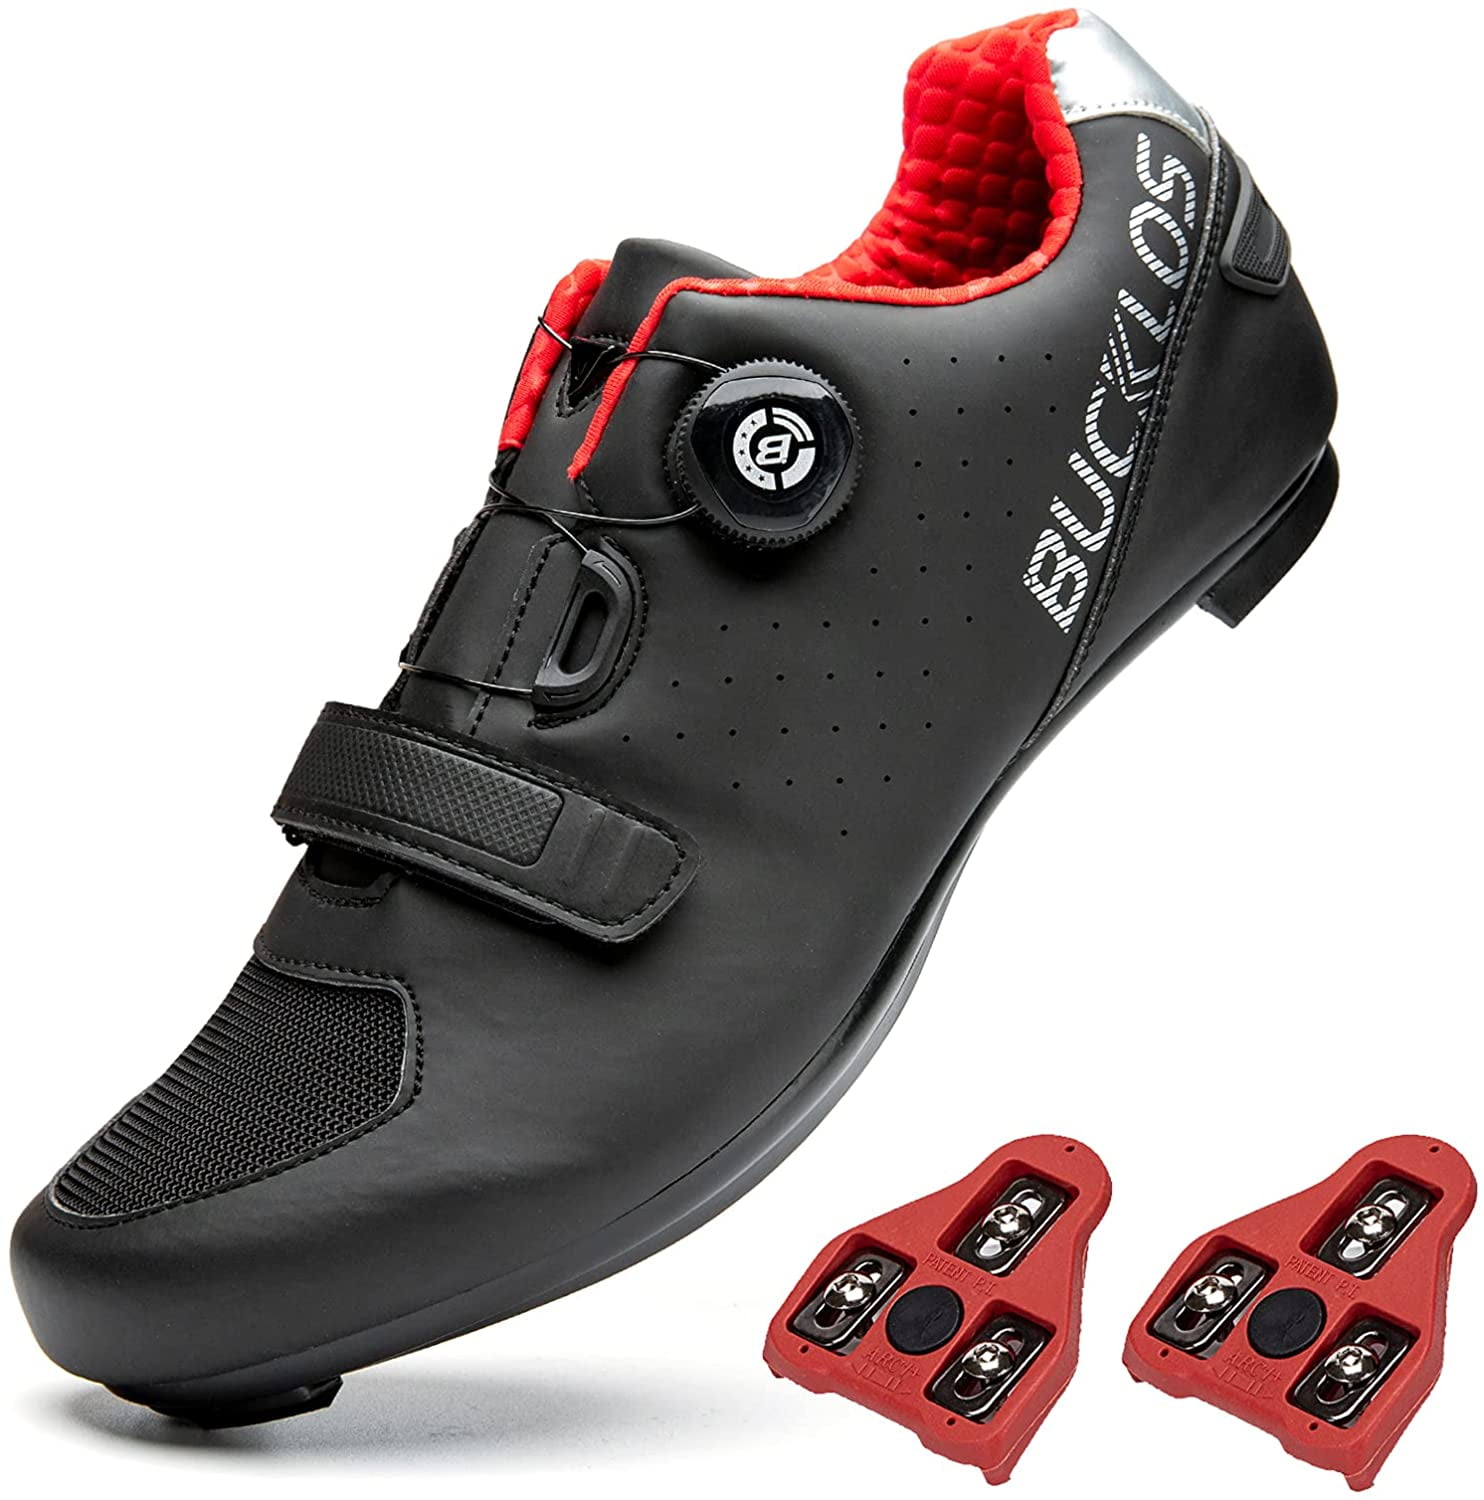 Outdoor Cycling Shoes Men Sneakers Road Bike Breathable Bicycle Racing Shoes 